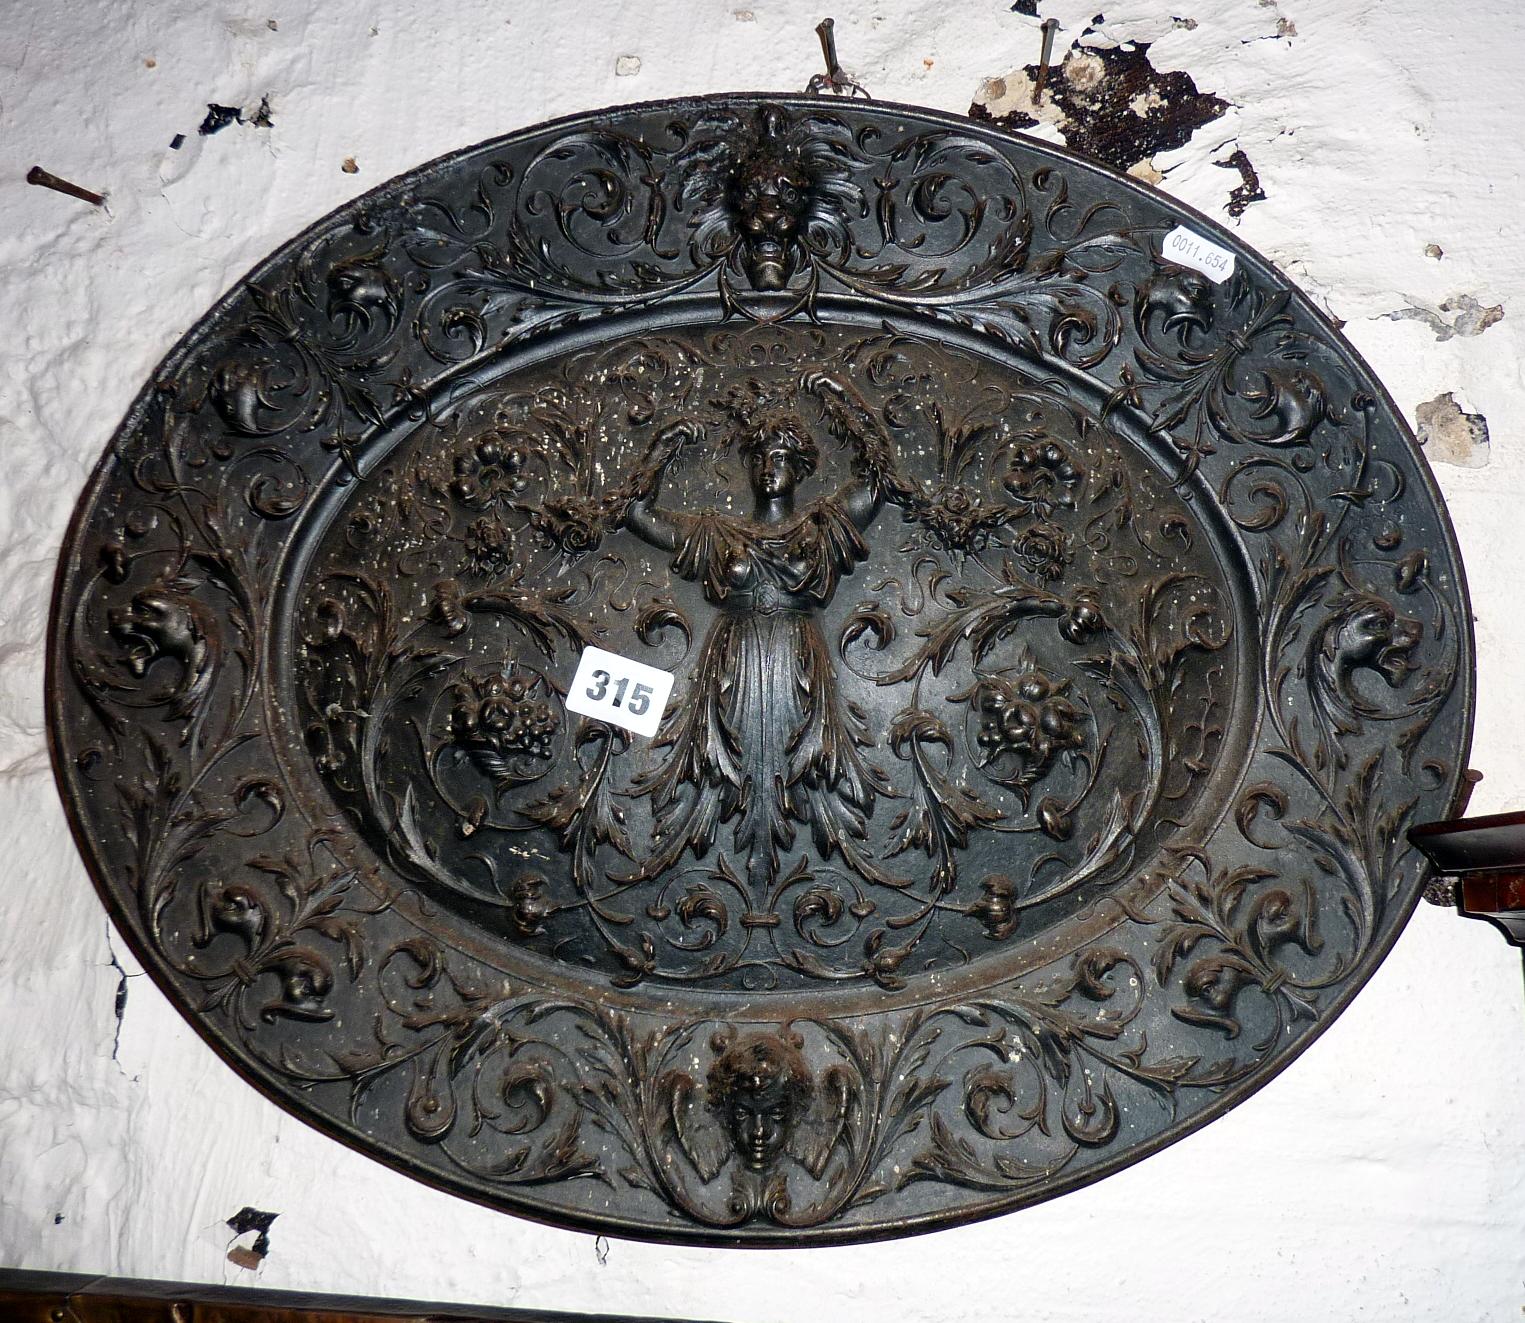 Ornate 19th c cast iron oval plaque by the American Radiator Company, depicting a classical figure